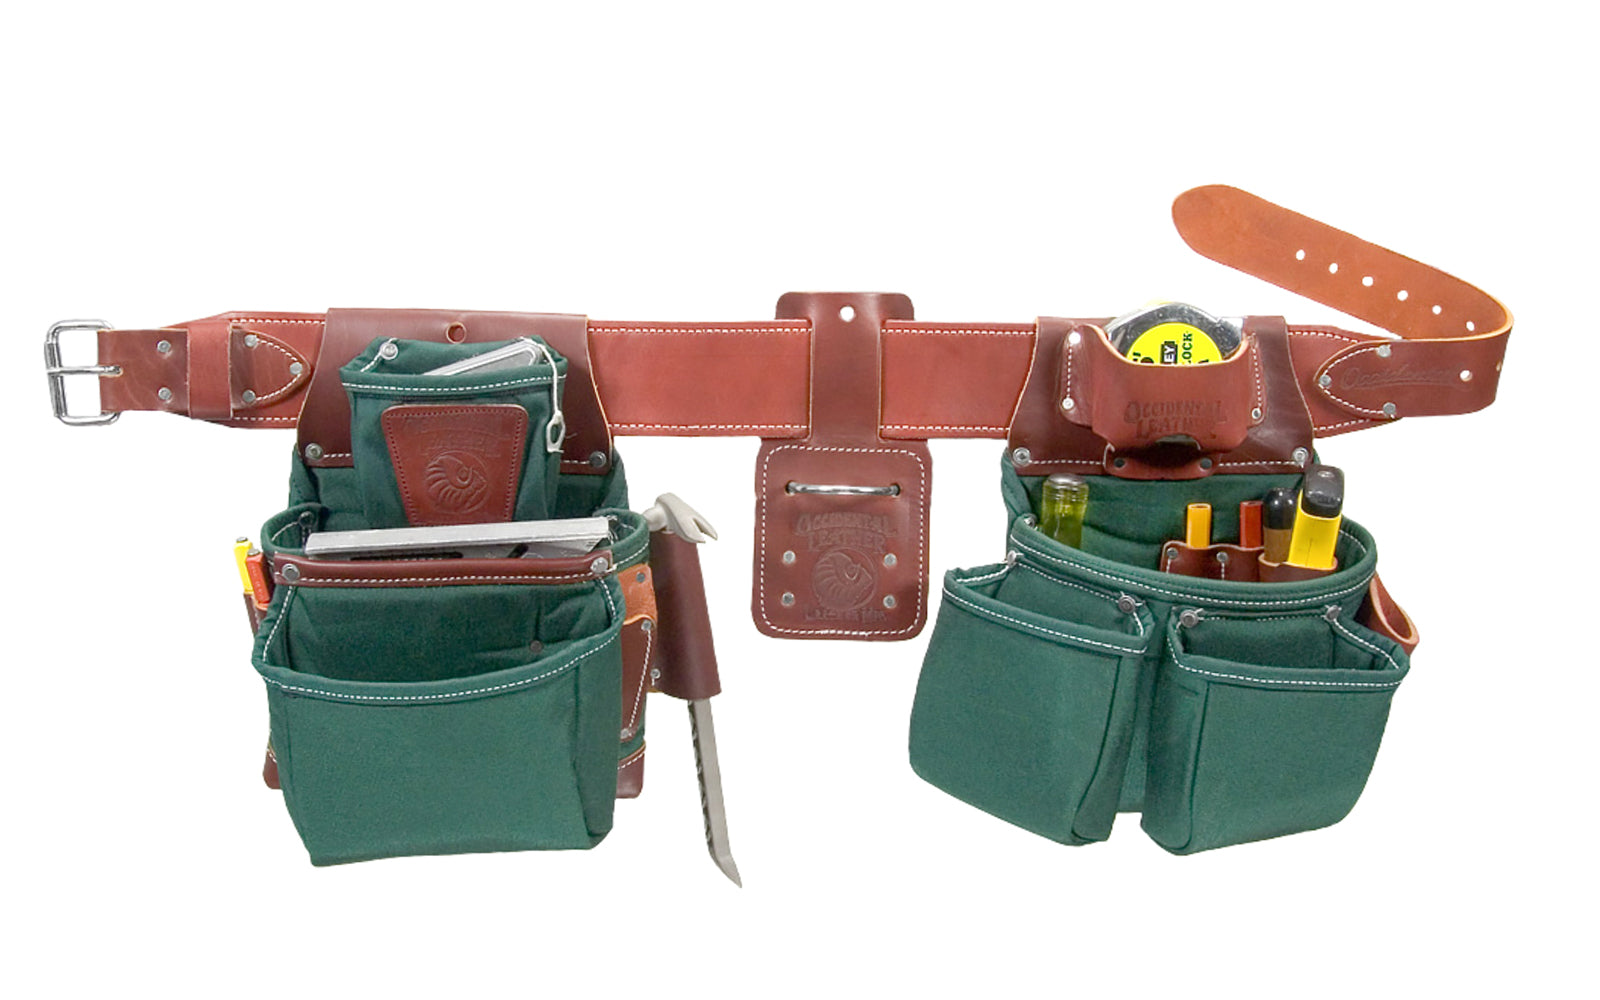 Occidental Leather "OxyLights" Tool Belt Set ~ 8080DB M ~ Medium Belt Size (3" Medium Ranger Work Belt) - Padded Two Ply Tool Bags Keep Shape - 21 pockets - 759244040005. Made of Extremely Abrasion Resistant Industrial Nylon - "OxyLights" 8080DB Tool Belt Package - Industrial Nylon Material for heavy use. Made in USA